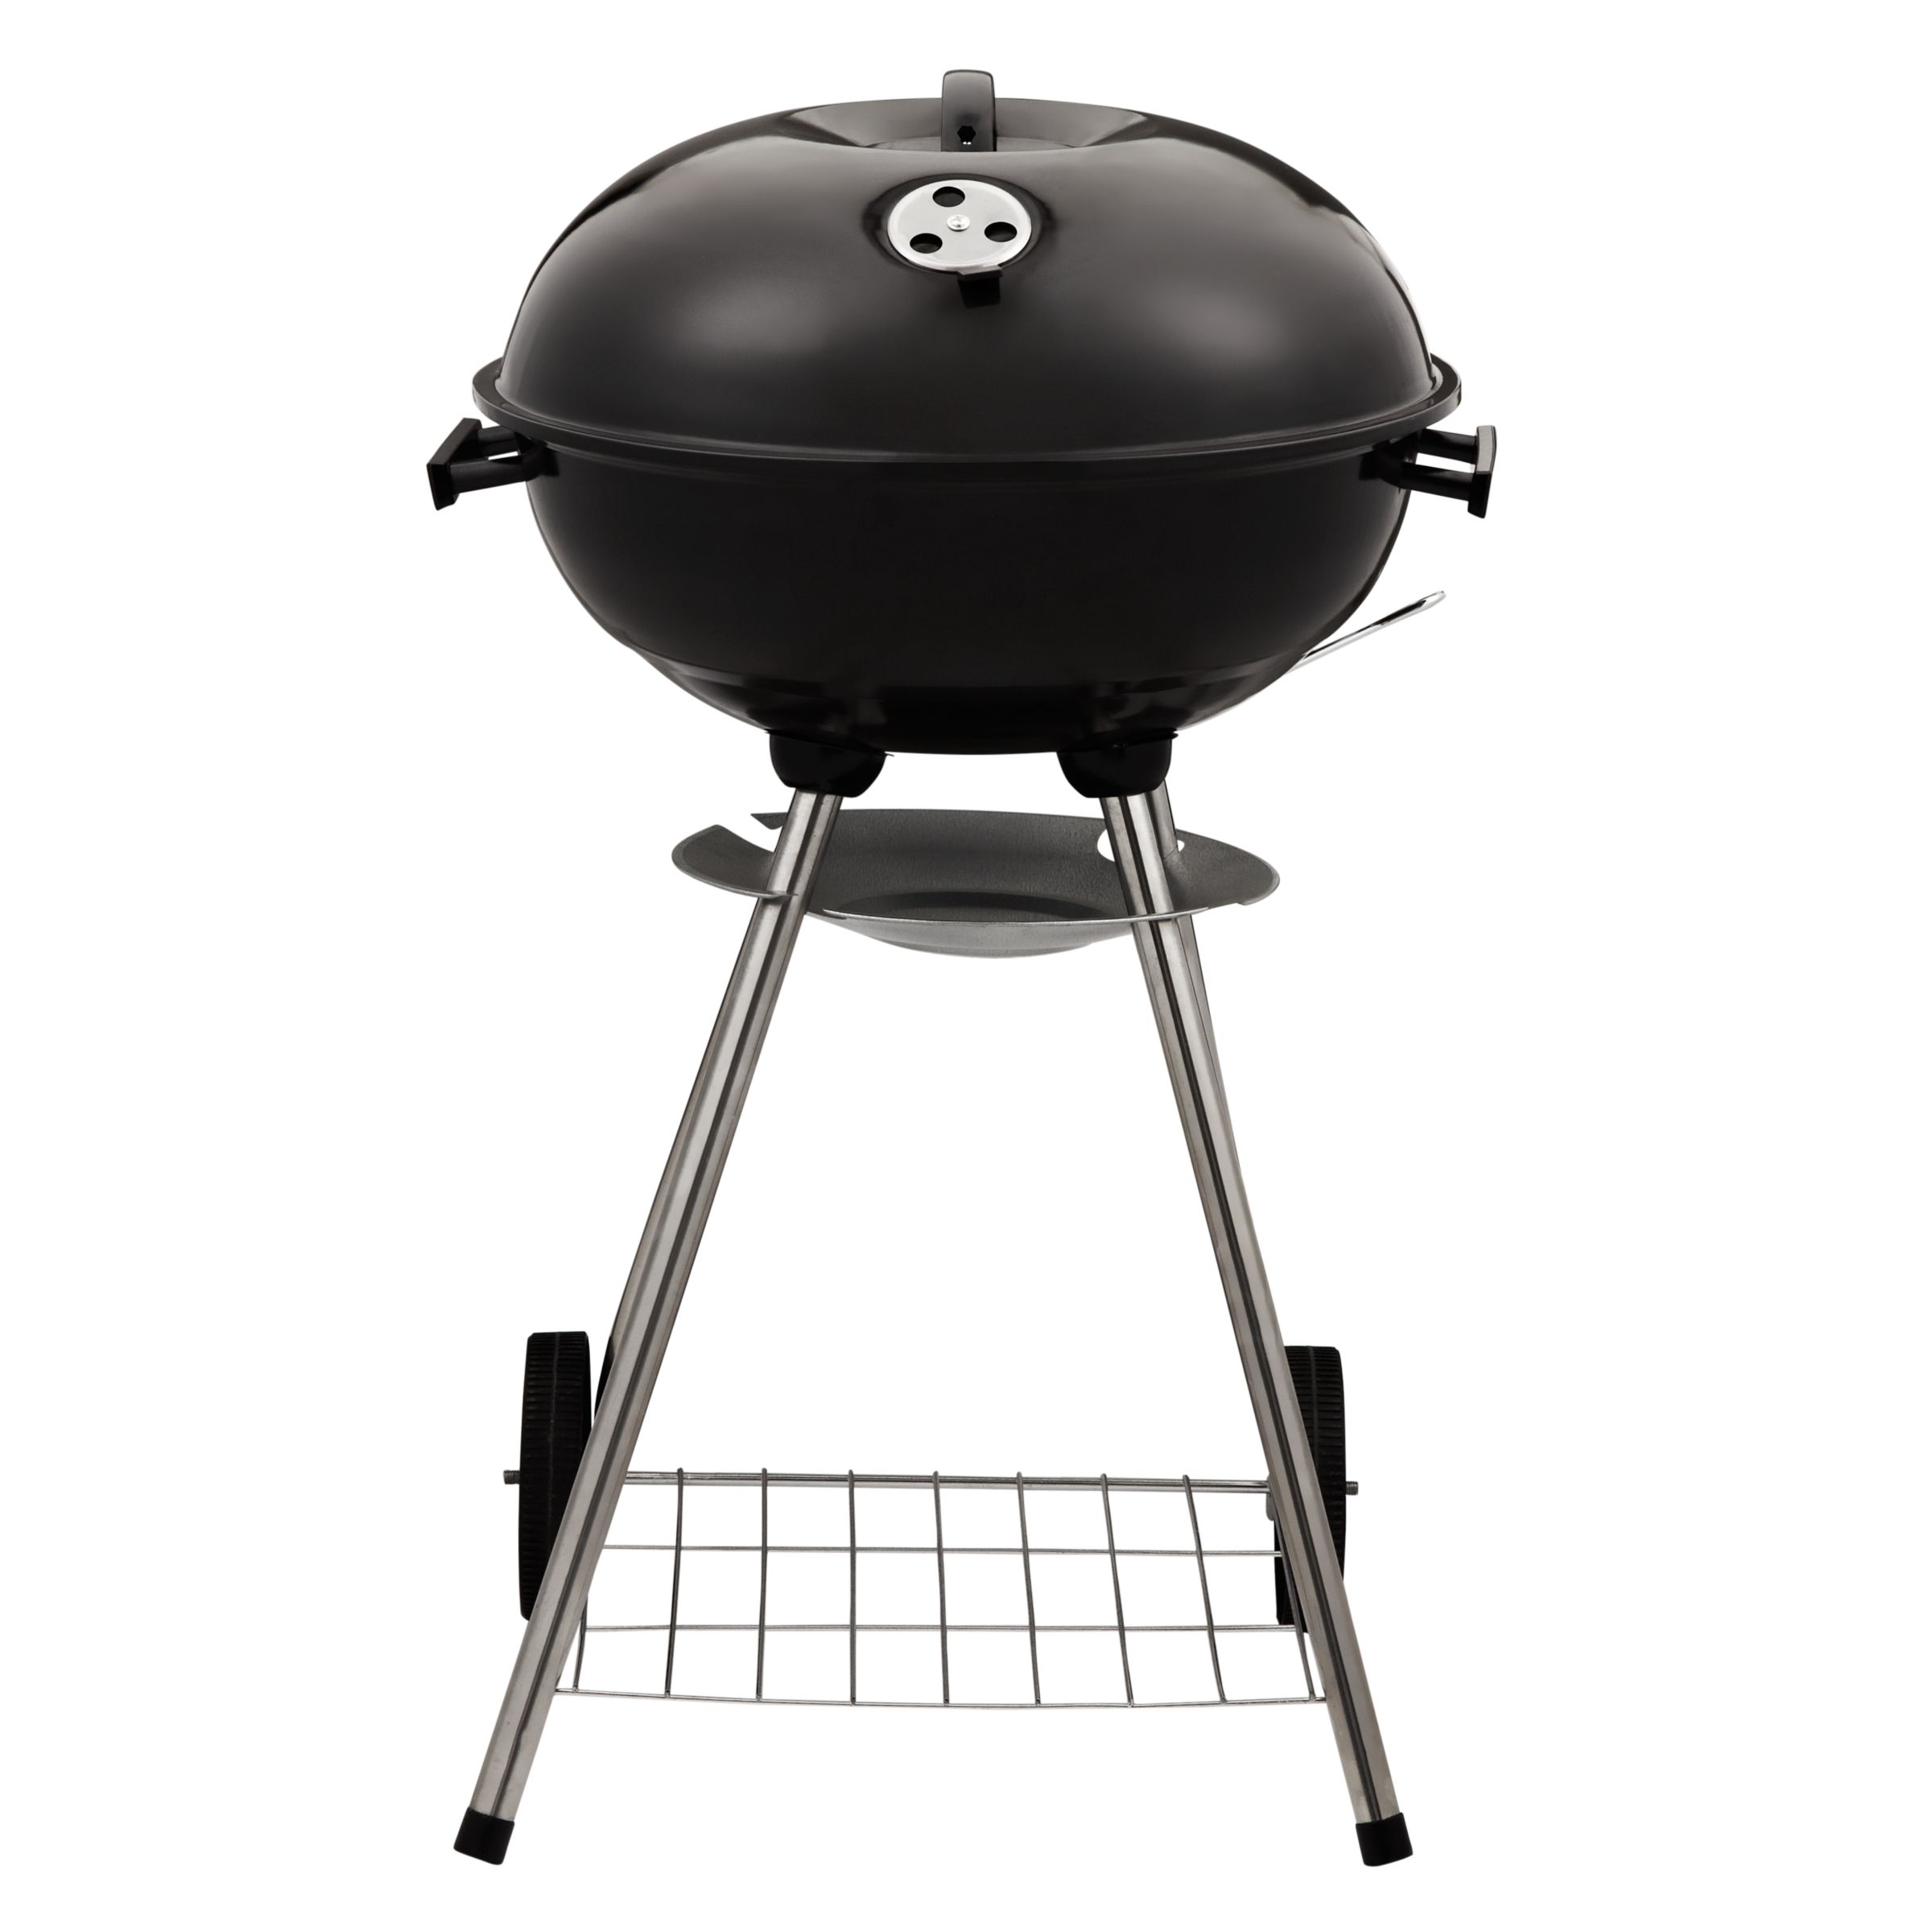 John Lewis 46cm Charcoal Kettle Barbecue